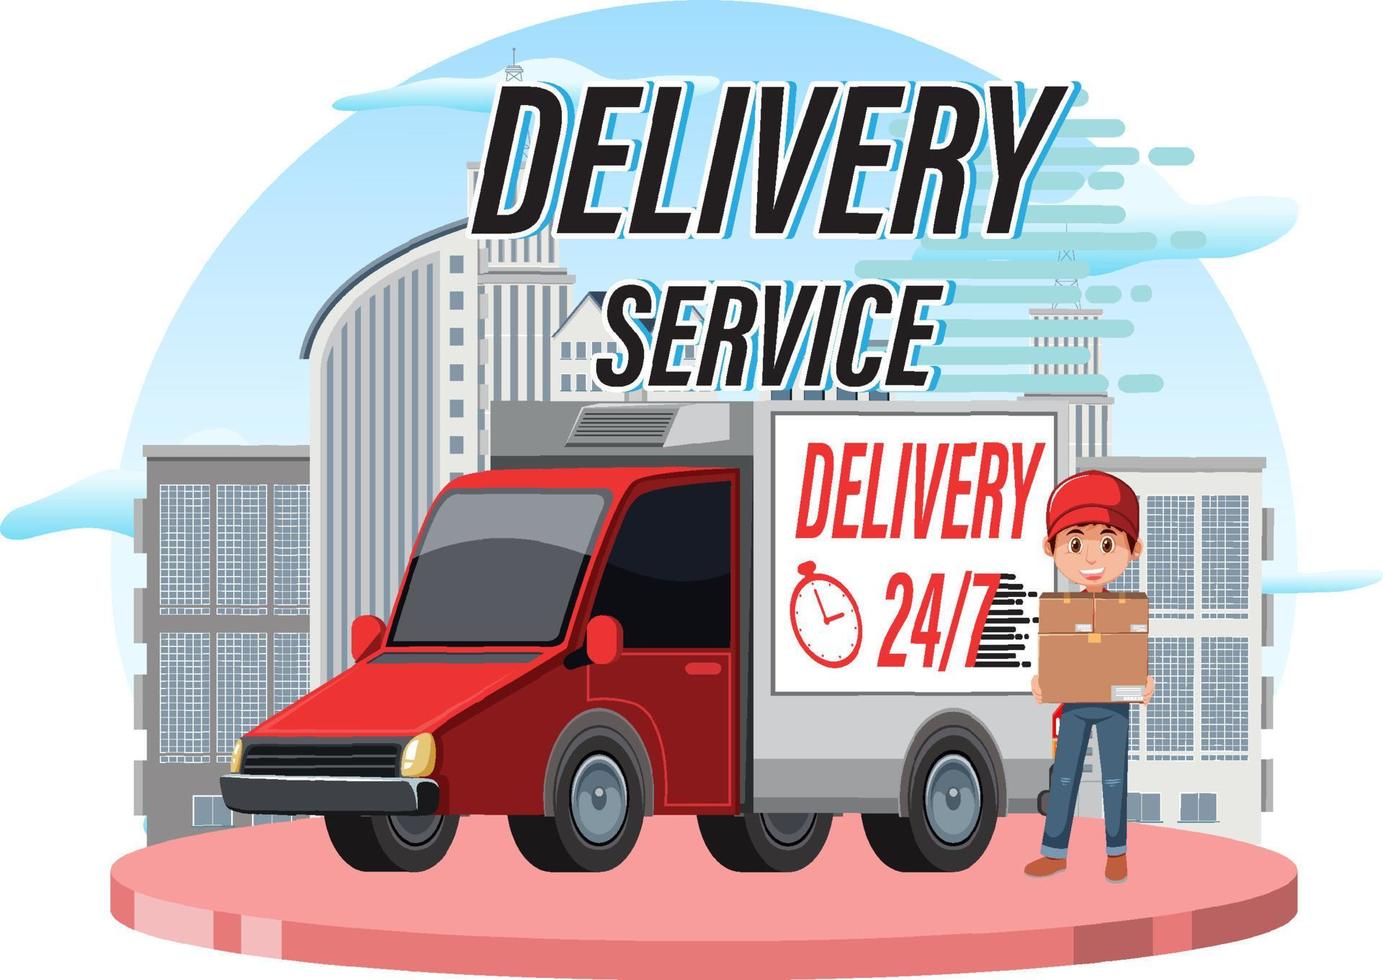 Delivery Service logo with panel van and courier cartoon character vector